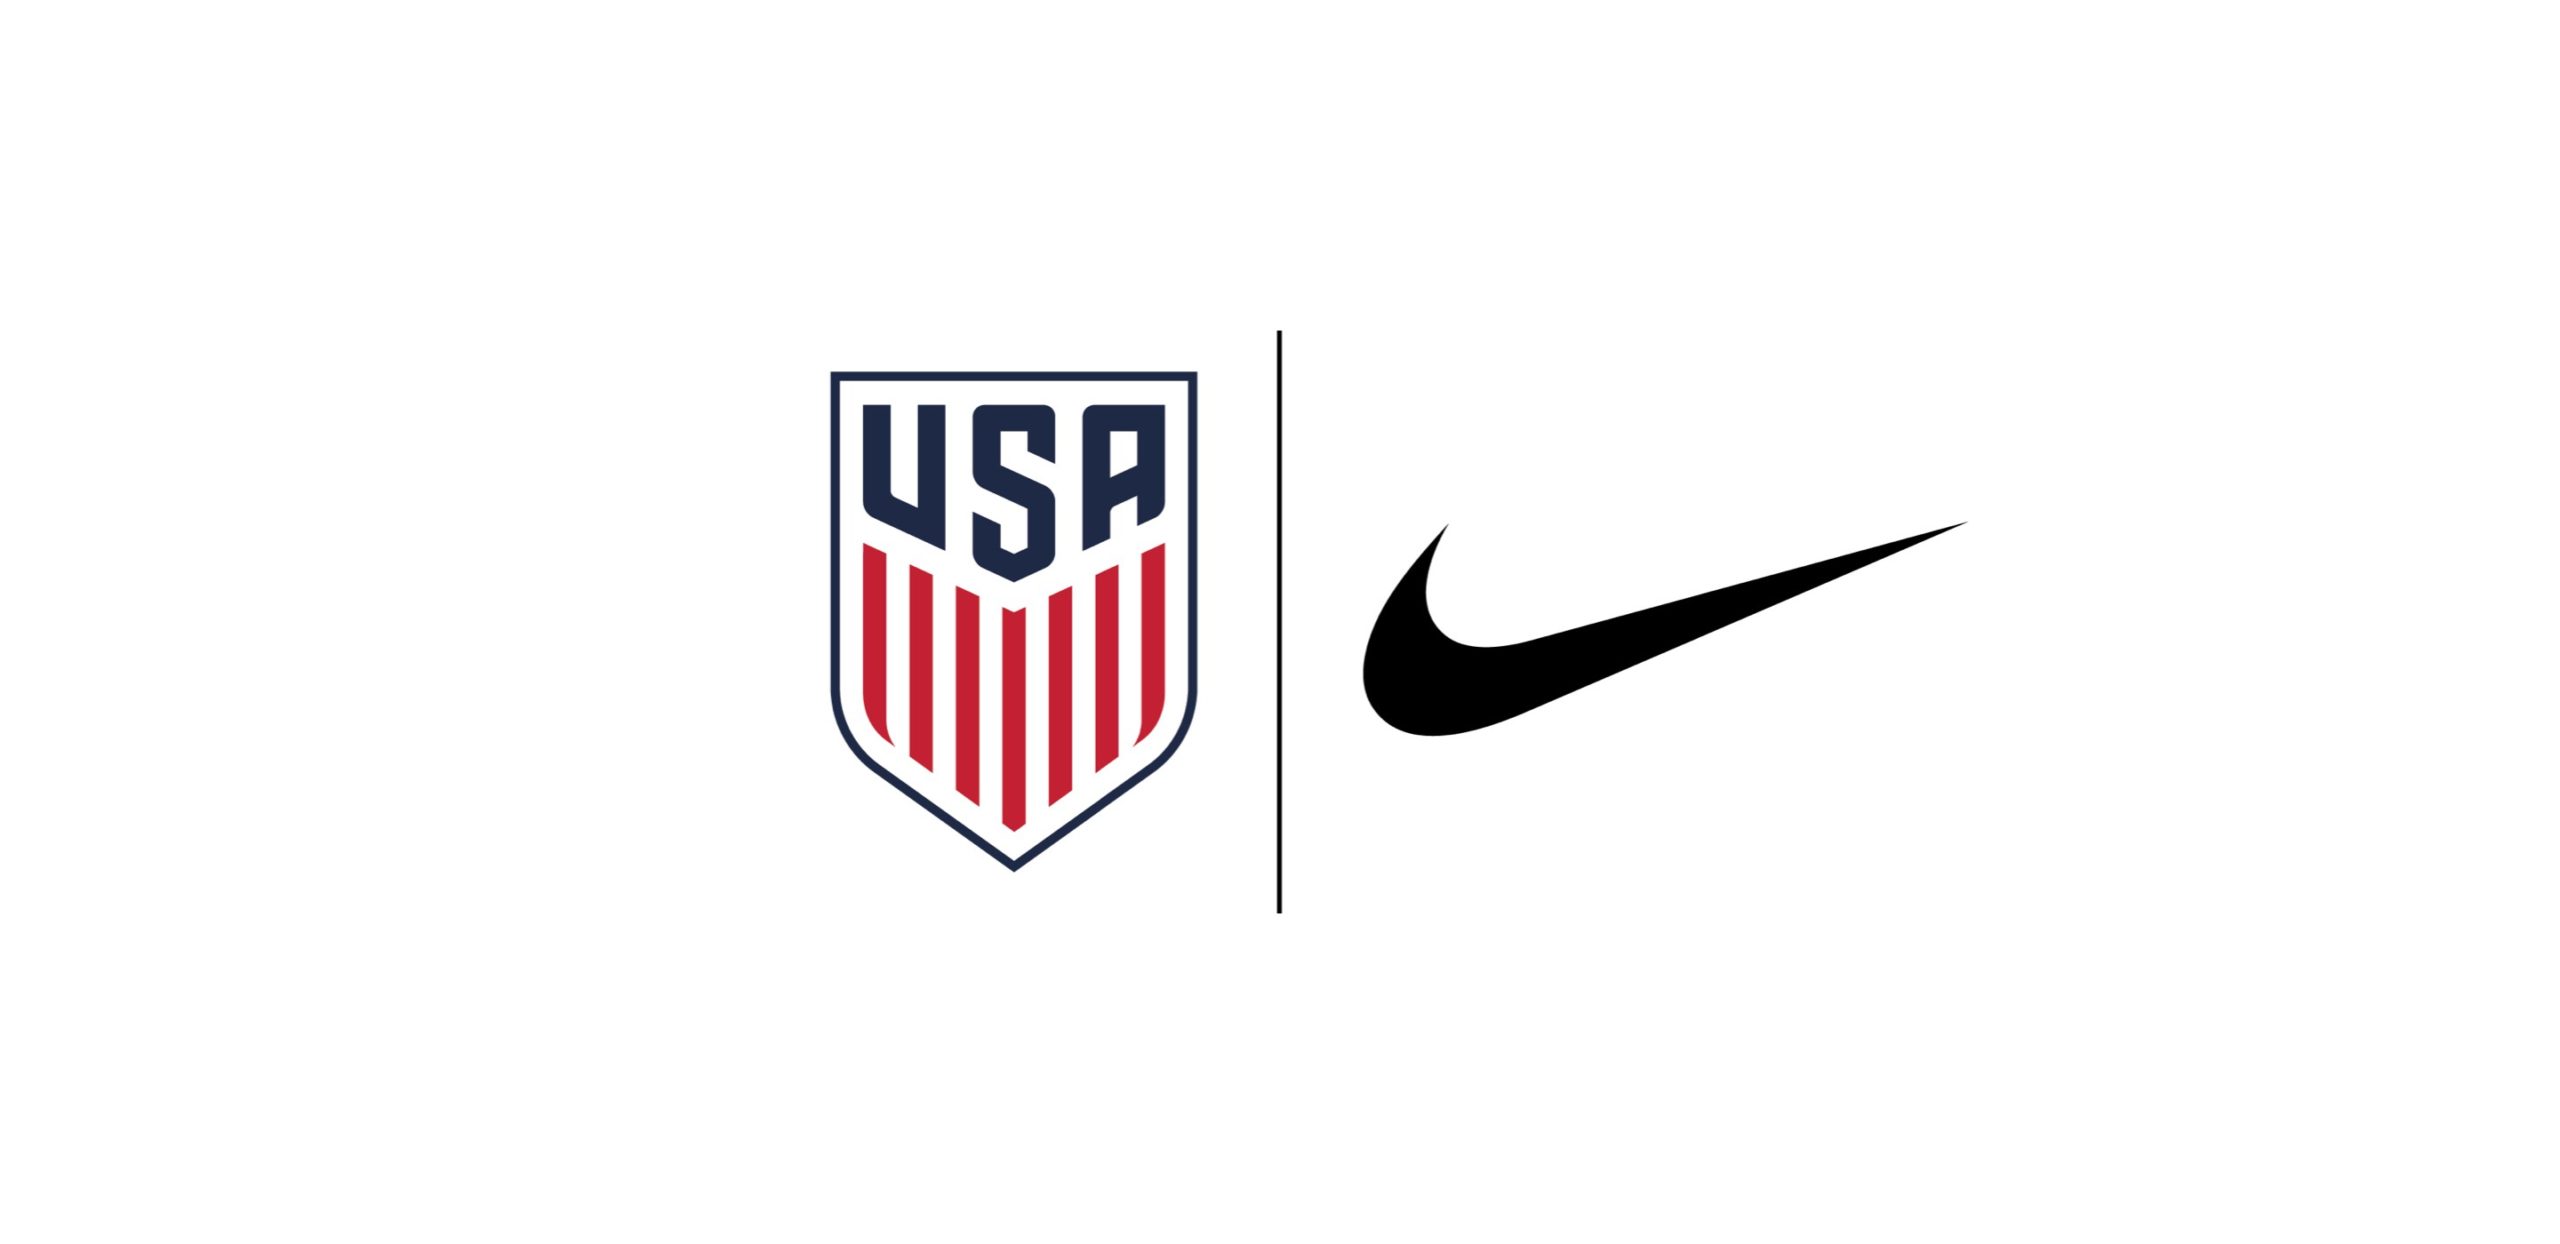 Nike go long with record US Soccer deal